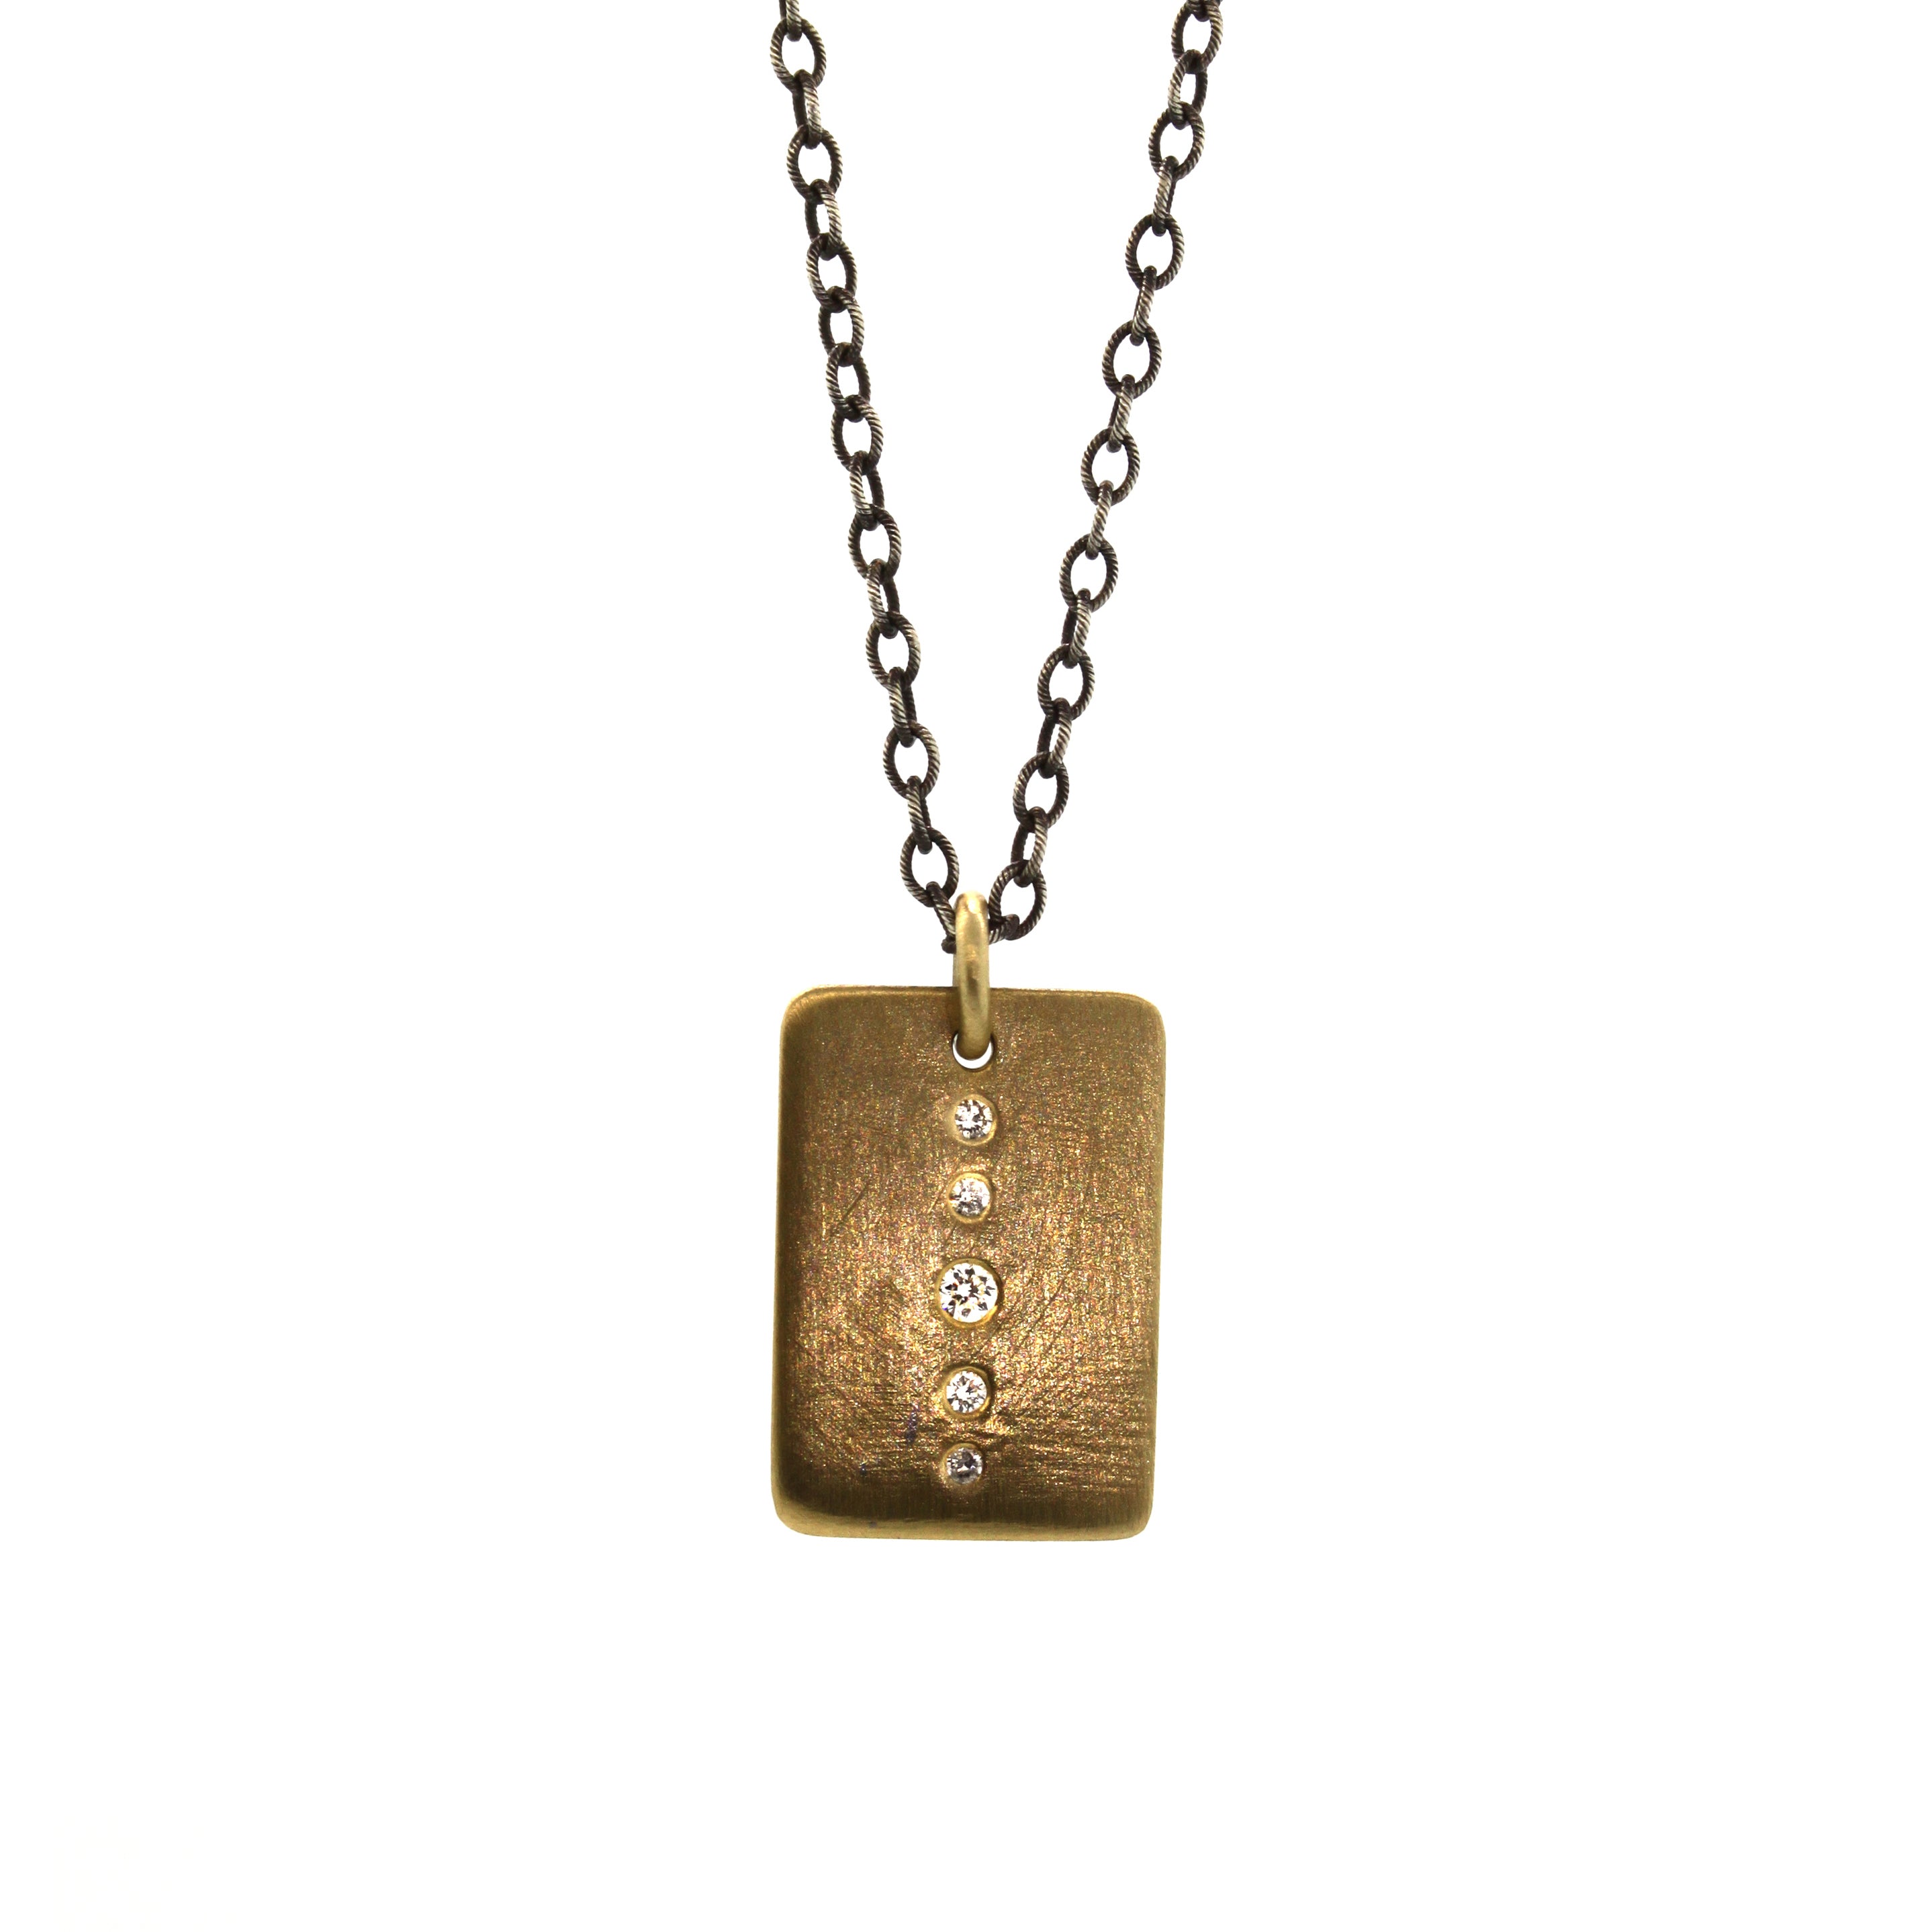 This Large Diamond Brick necklace features a rectangular gold pendant with 5 diamonds inlaid in a graduating pattern dangling from a long oxidized silver chain. It was hand crafted by one of Houston's finest custom jewelers, Rebecca Lankford, in Houston Heights. 